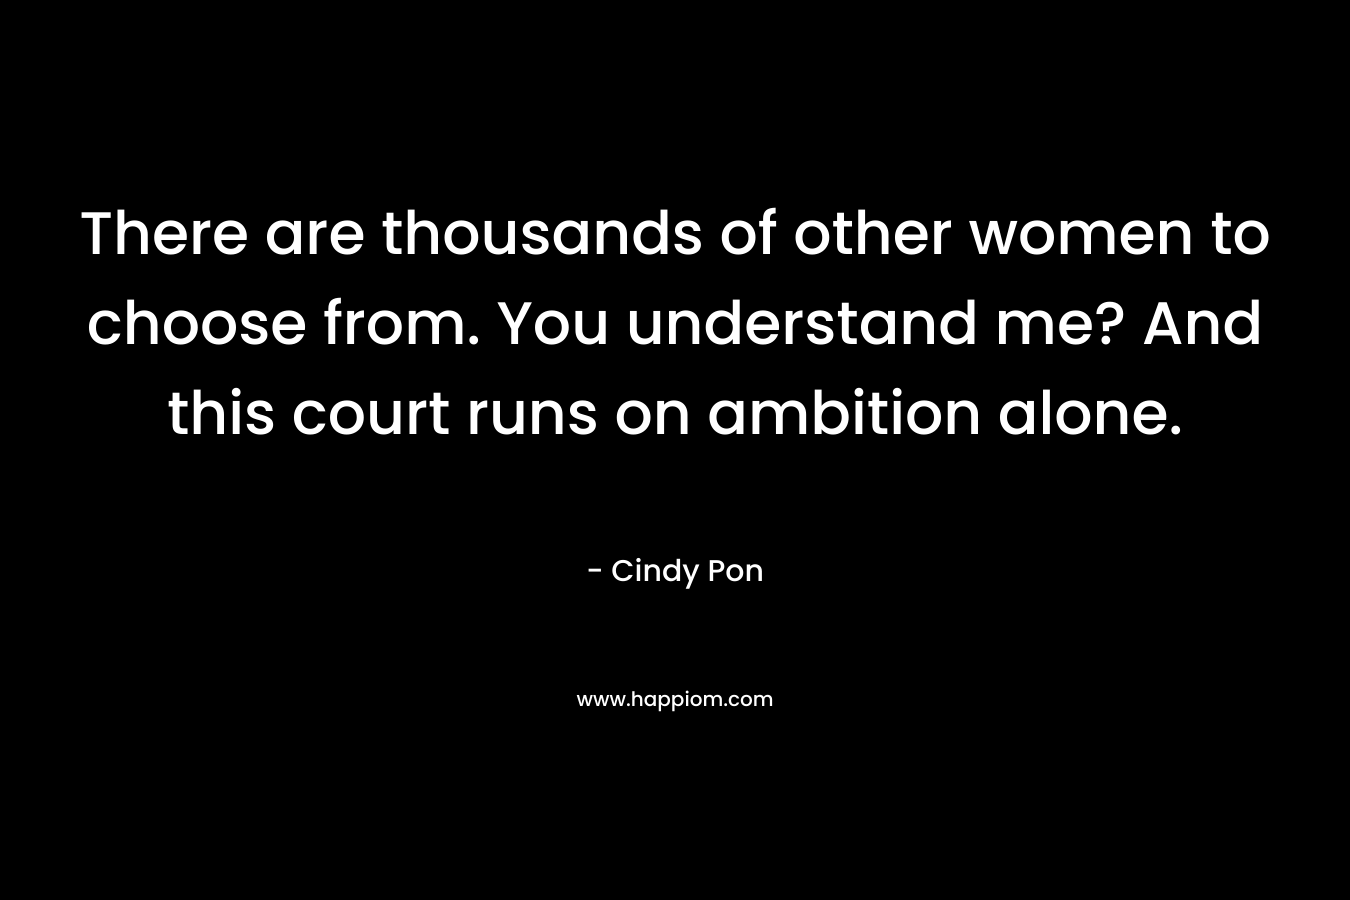 There are thousands of other women to choose from. You understand me? And this court runs on ambition alone.